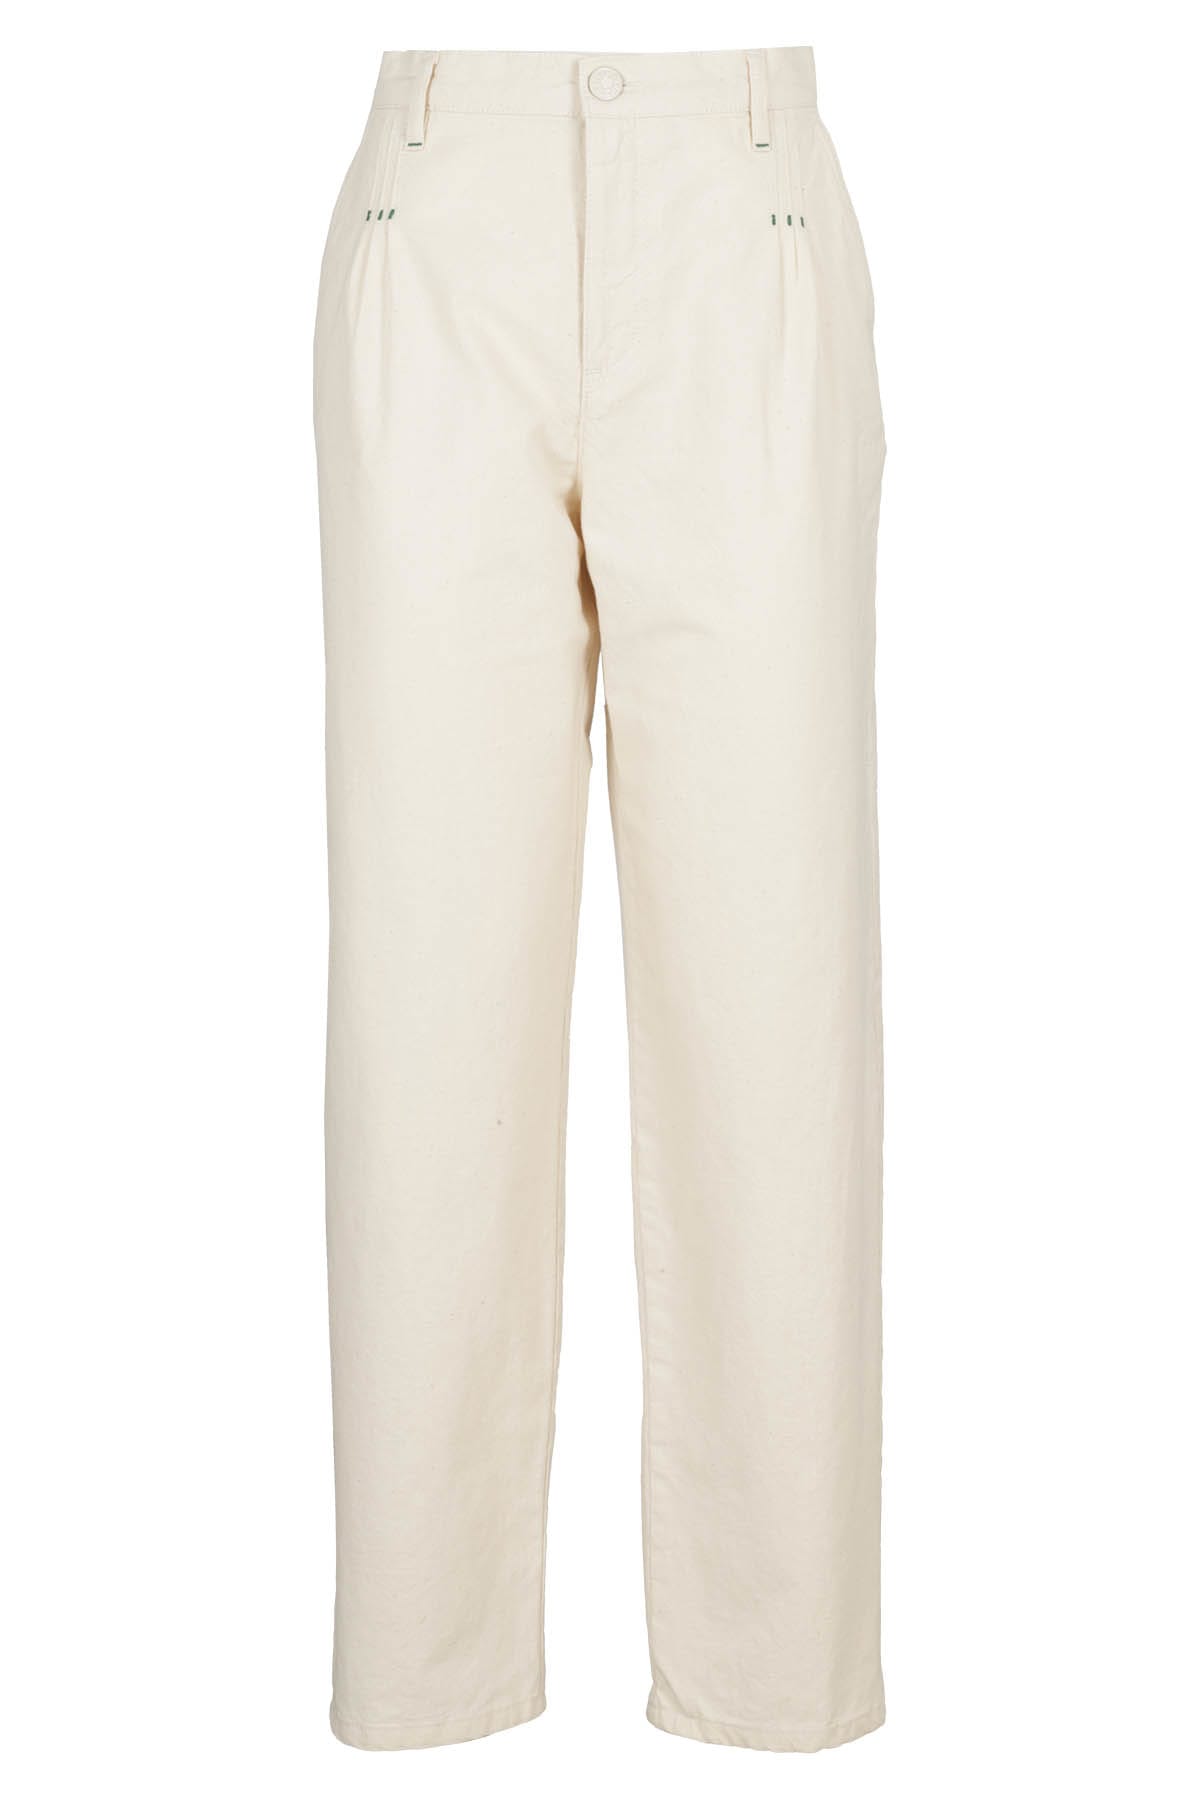 See By Chloé Pantalone In Antique White